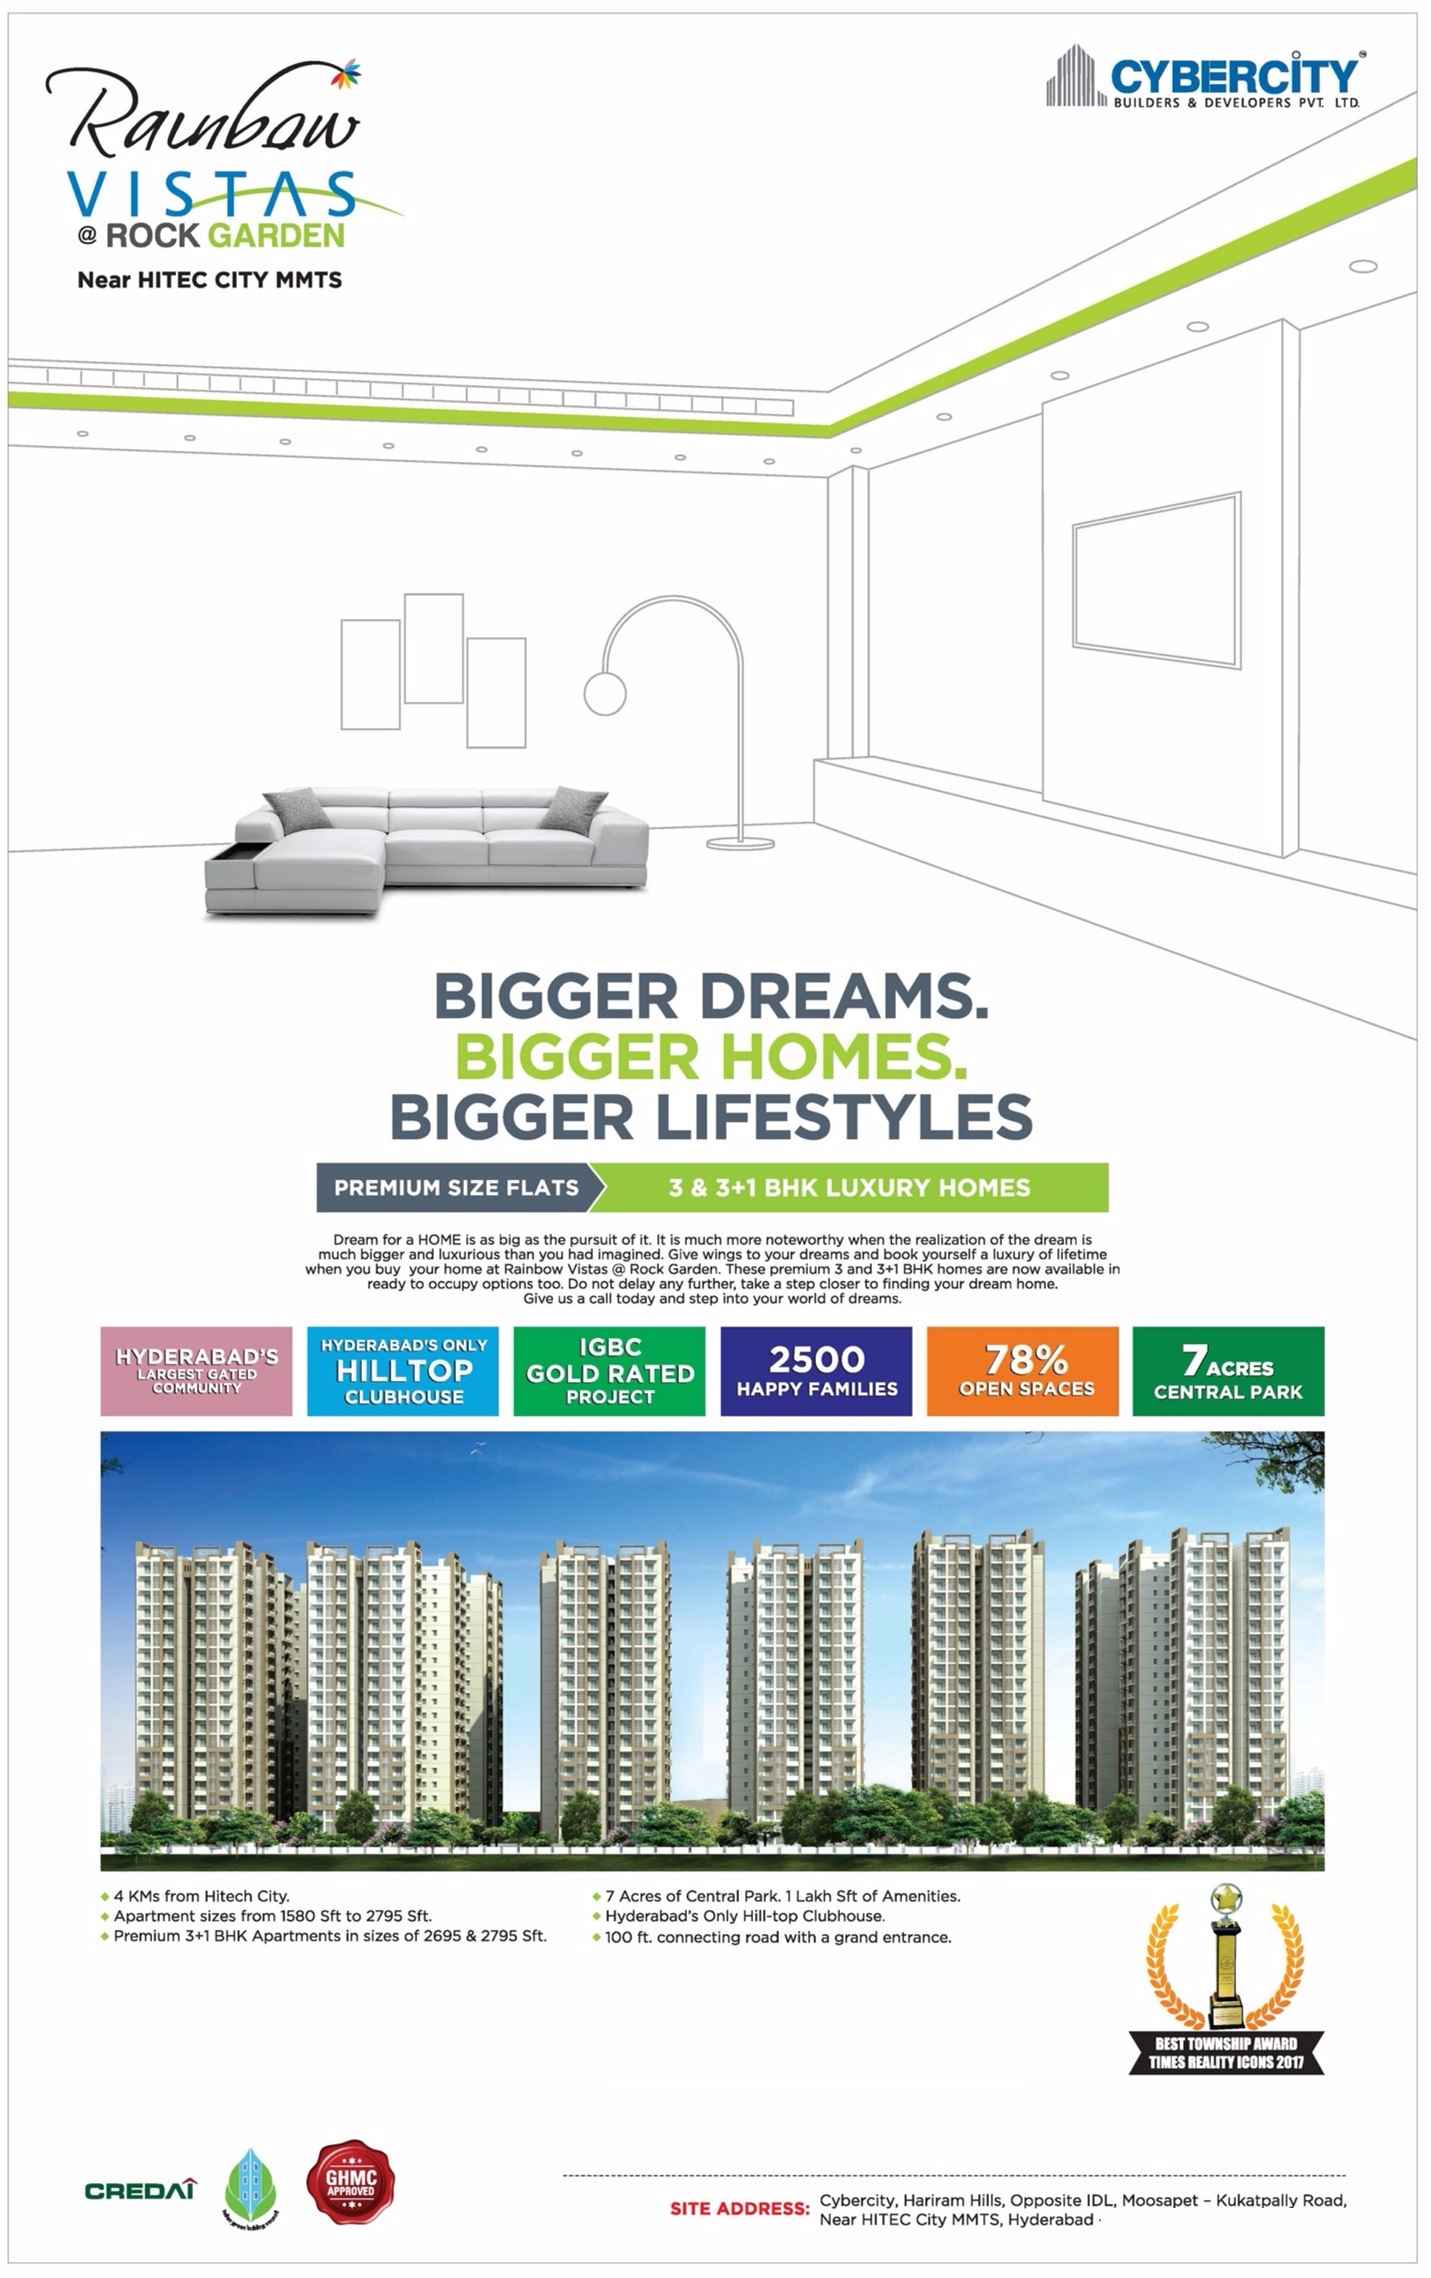 Bigger dreams with bigger homes and lifestyle at Cybercity Rainbow Vistas in Hyderabad Update